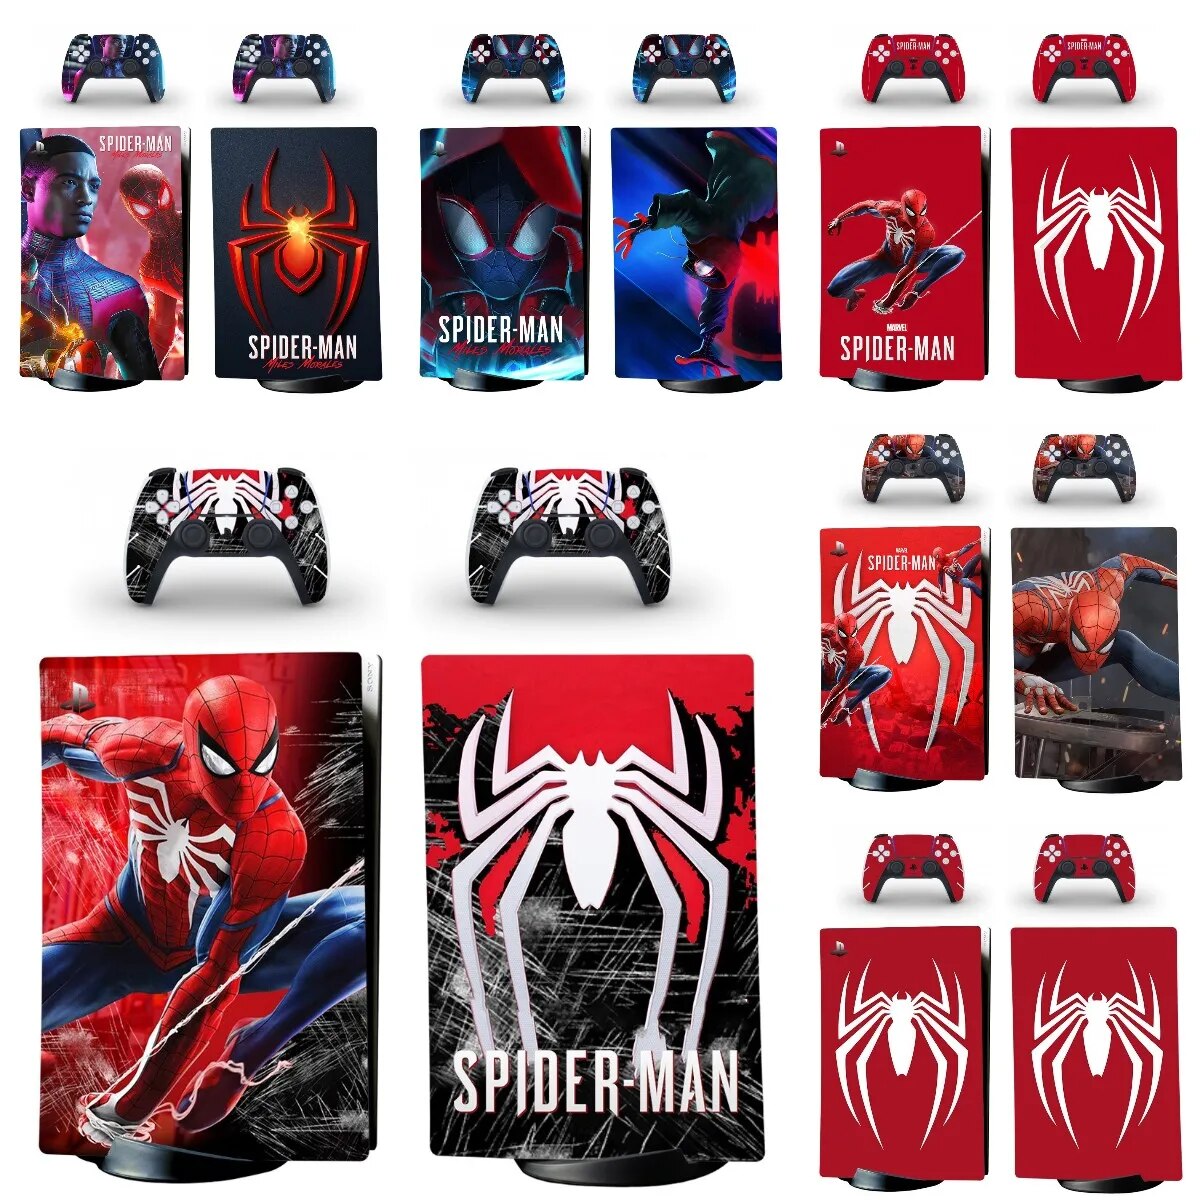 【Limited-time offer】 Spiderman Ps5 Digital Version Skin Sticker Decal Cover For 5 Console Controller Skin Sticker Vinyl